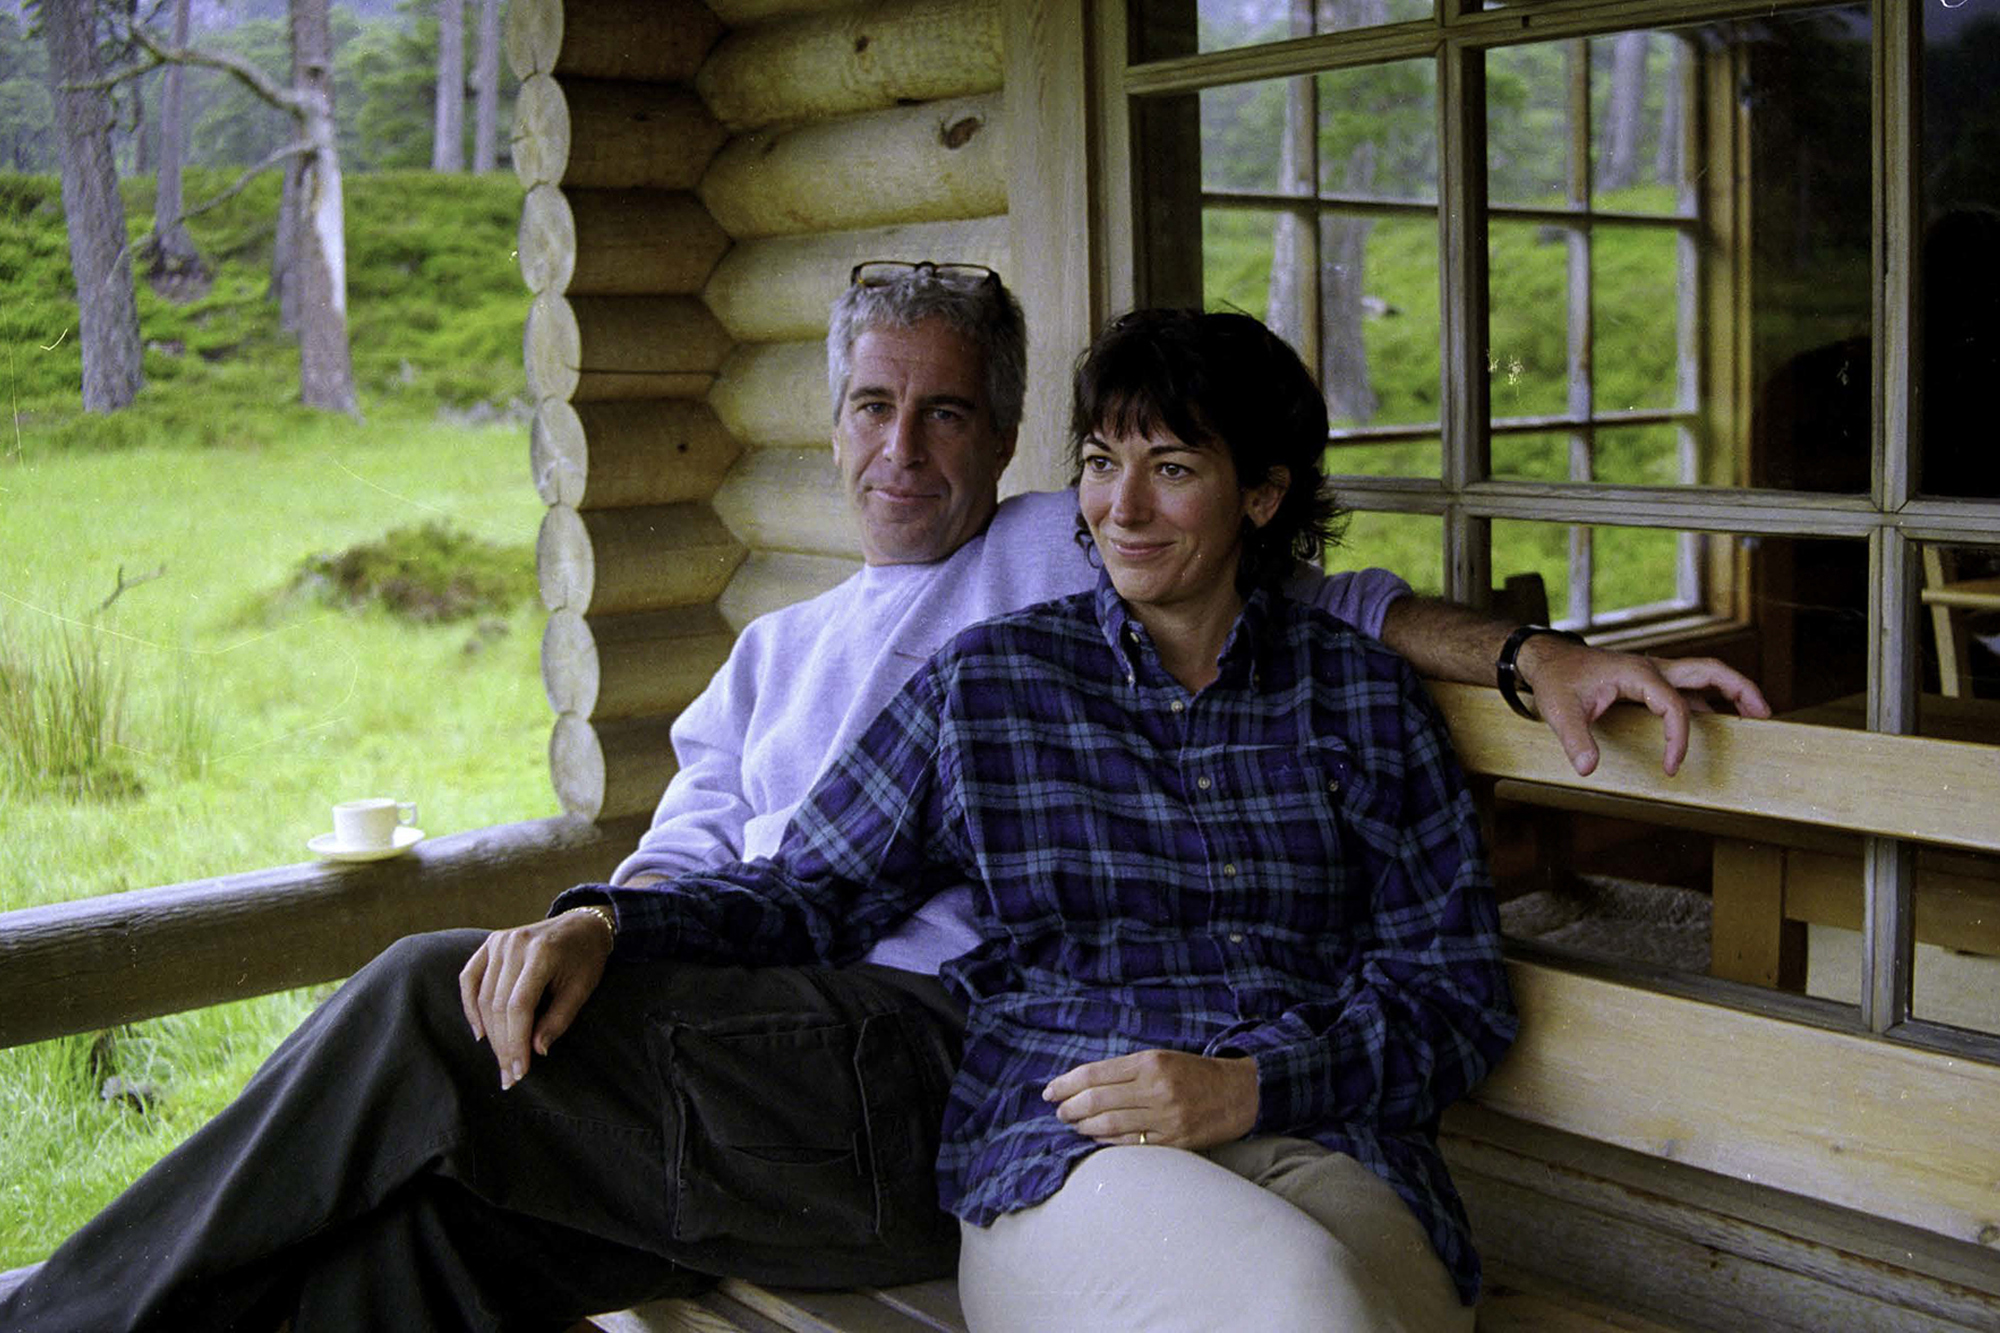 Jeffrey Epstein and Ghislaine Maxwell pictured lounging in Queen Elizabeth’s estate